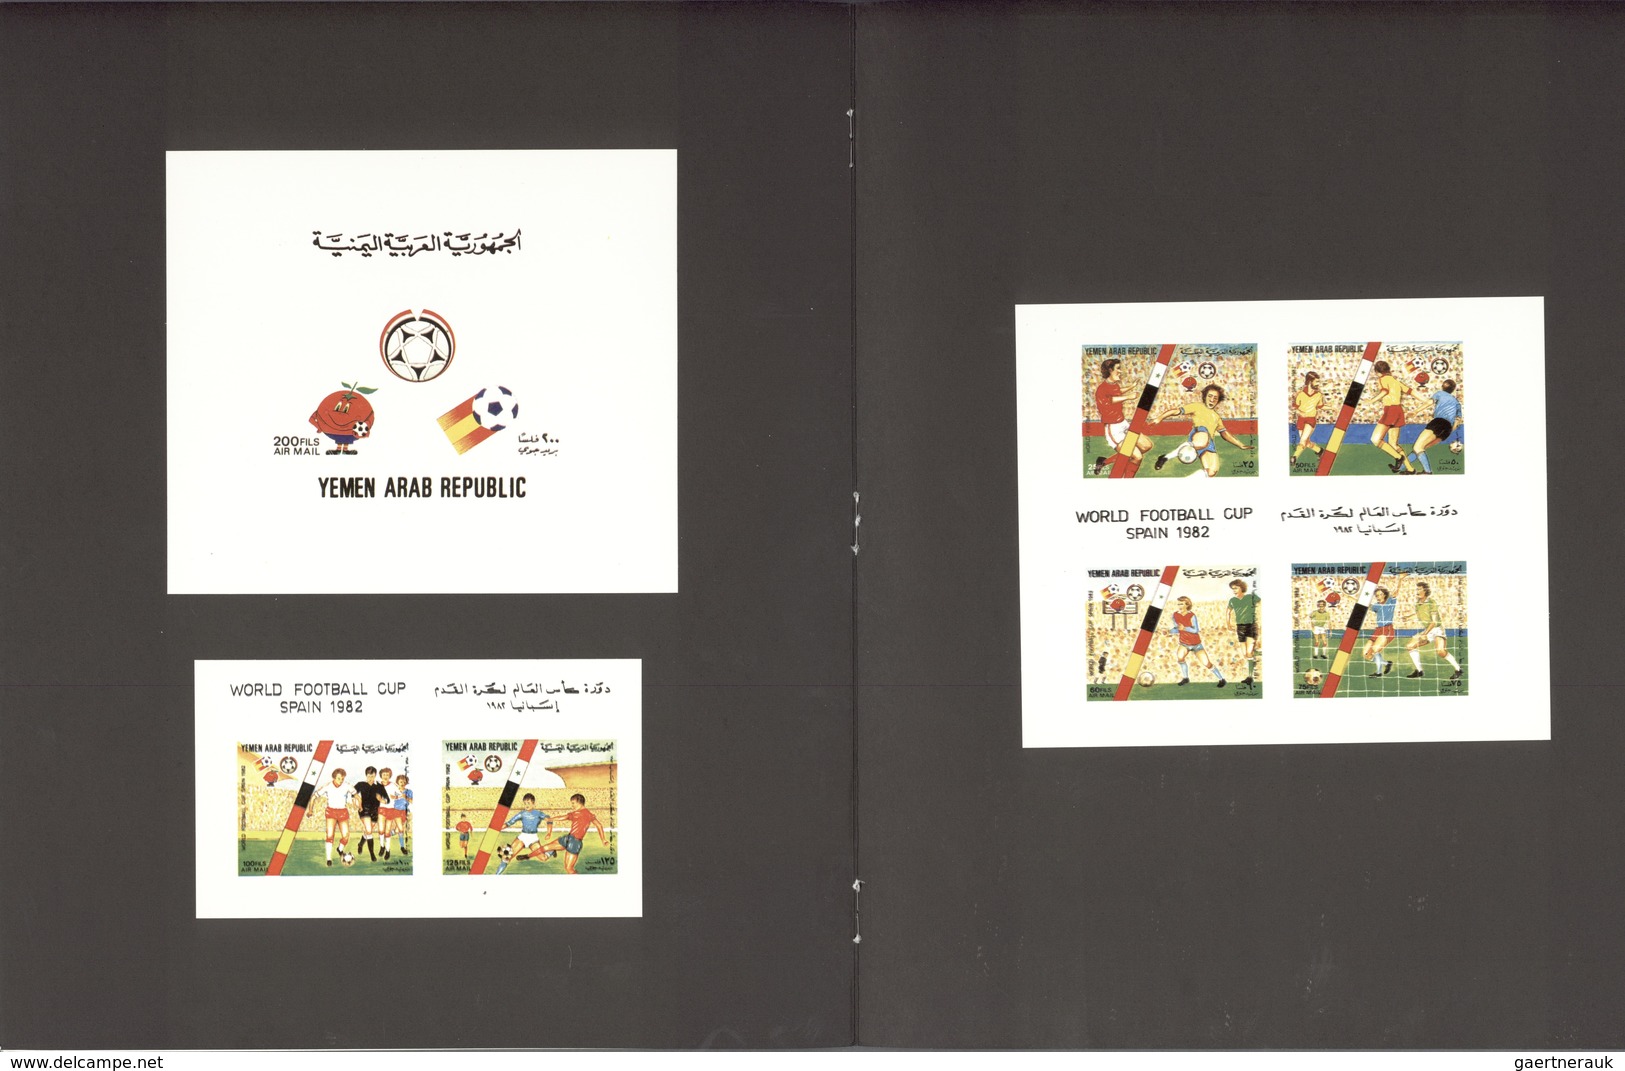 Jemen: 1980/1984 (ca.), 67 mostly different sample folders of the Ueberreuter printing company with